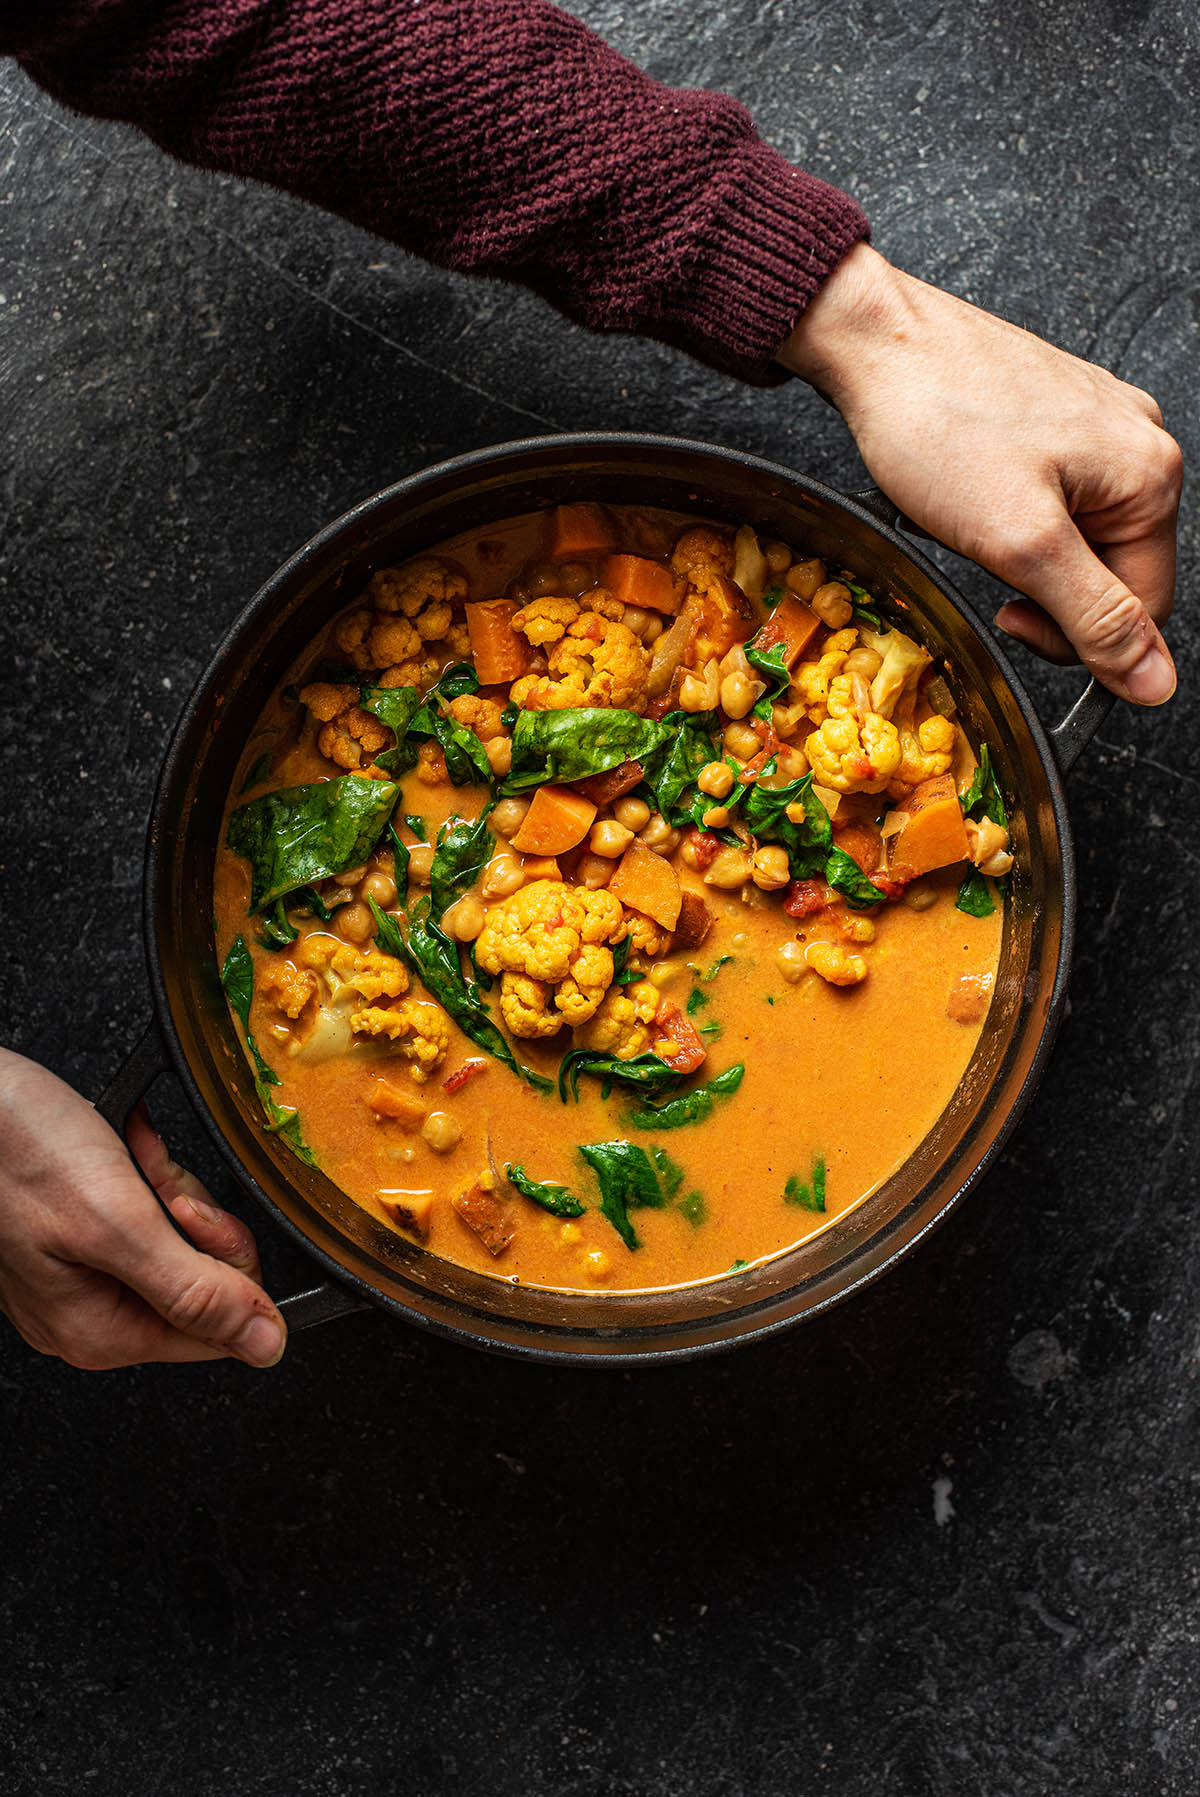 Hands lifting the pot of curry.